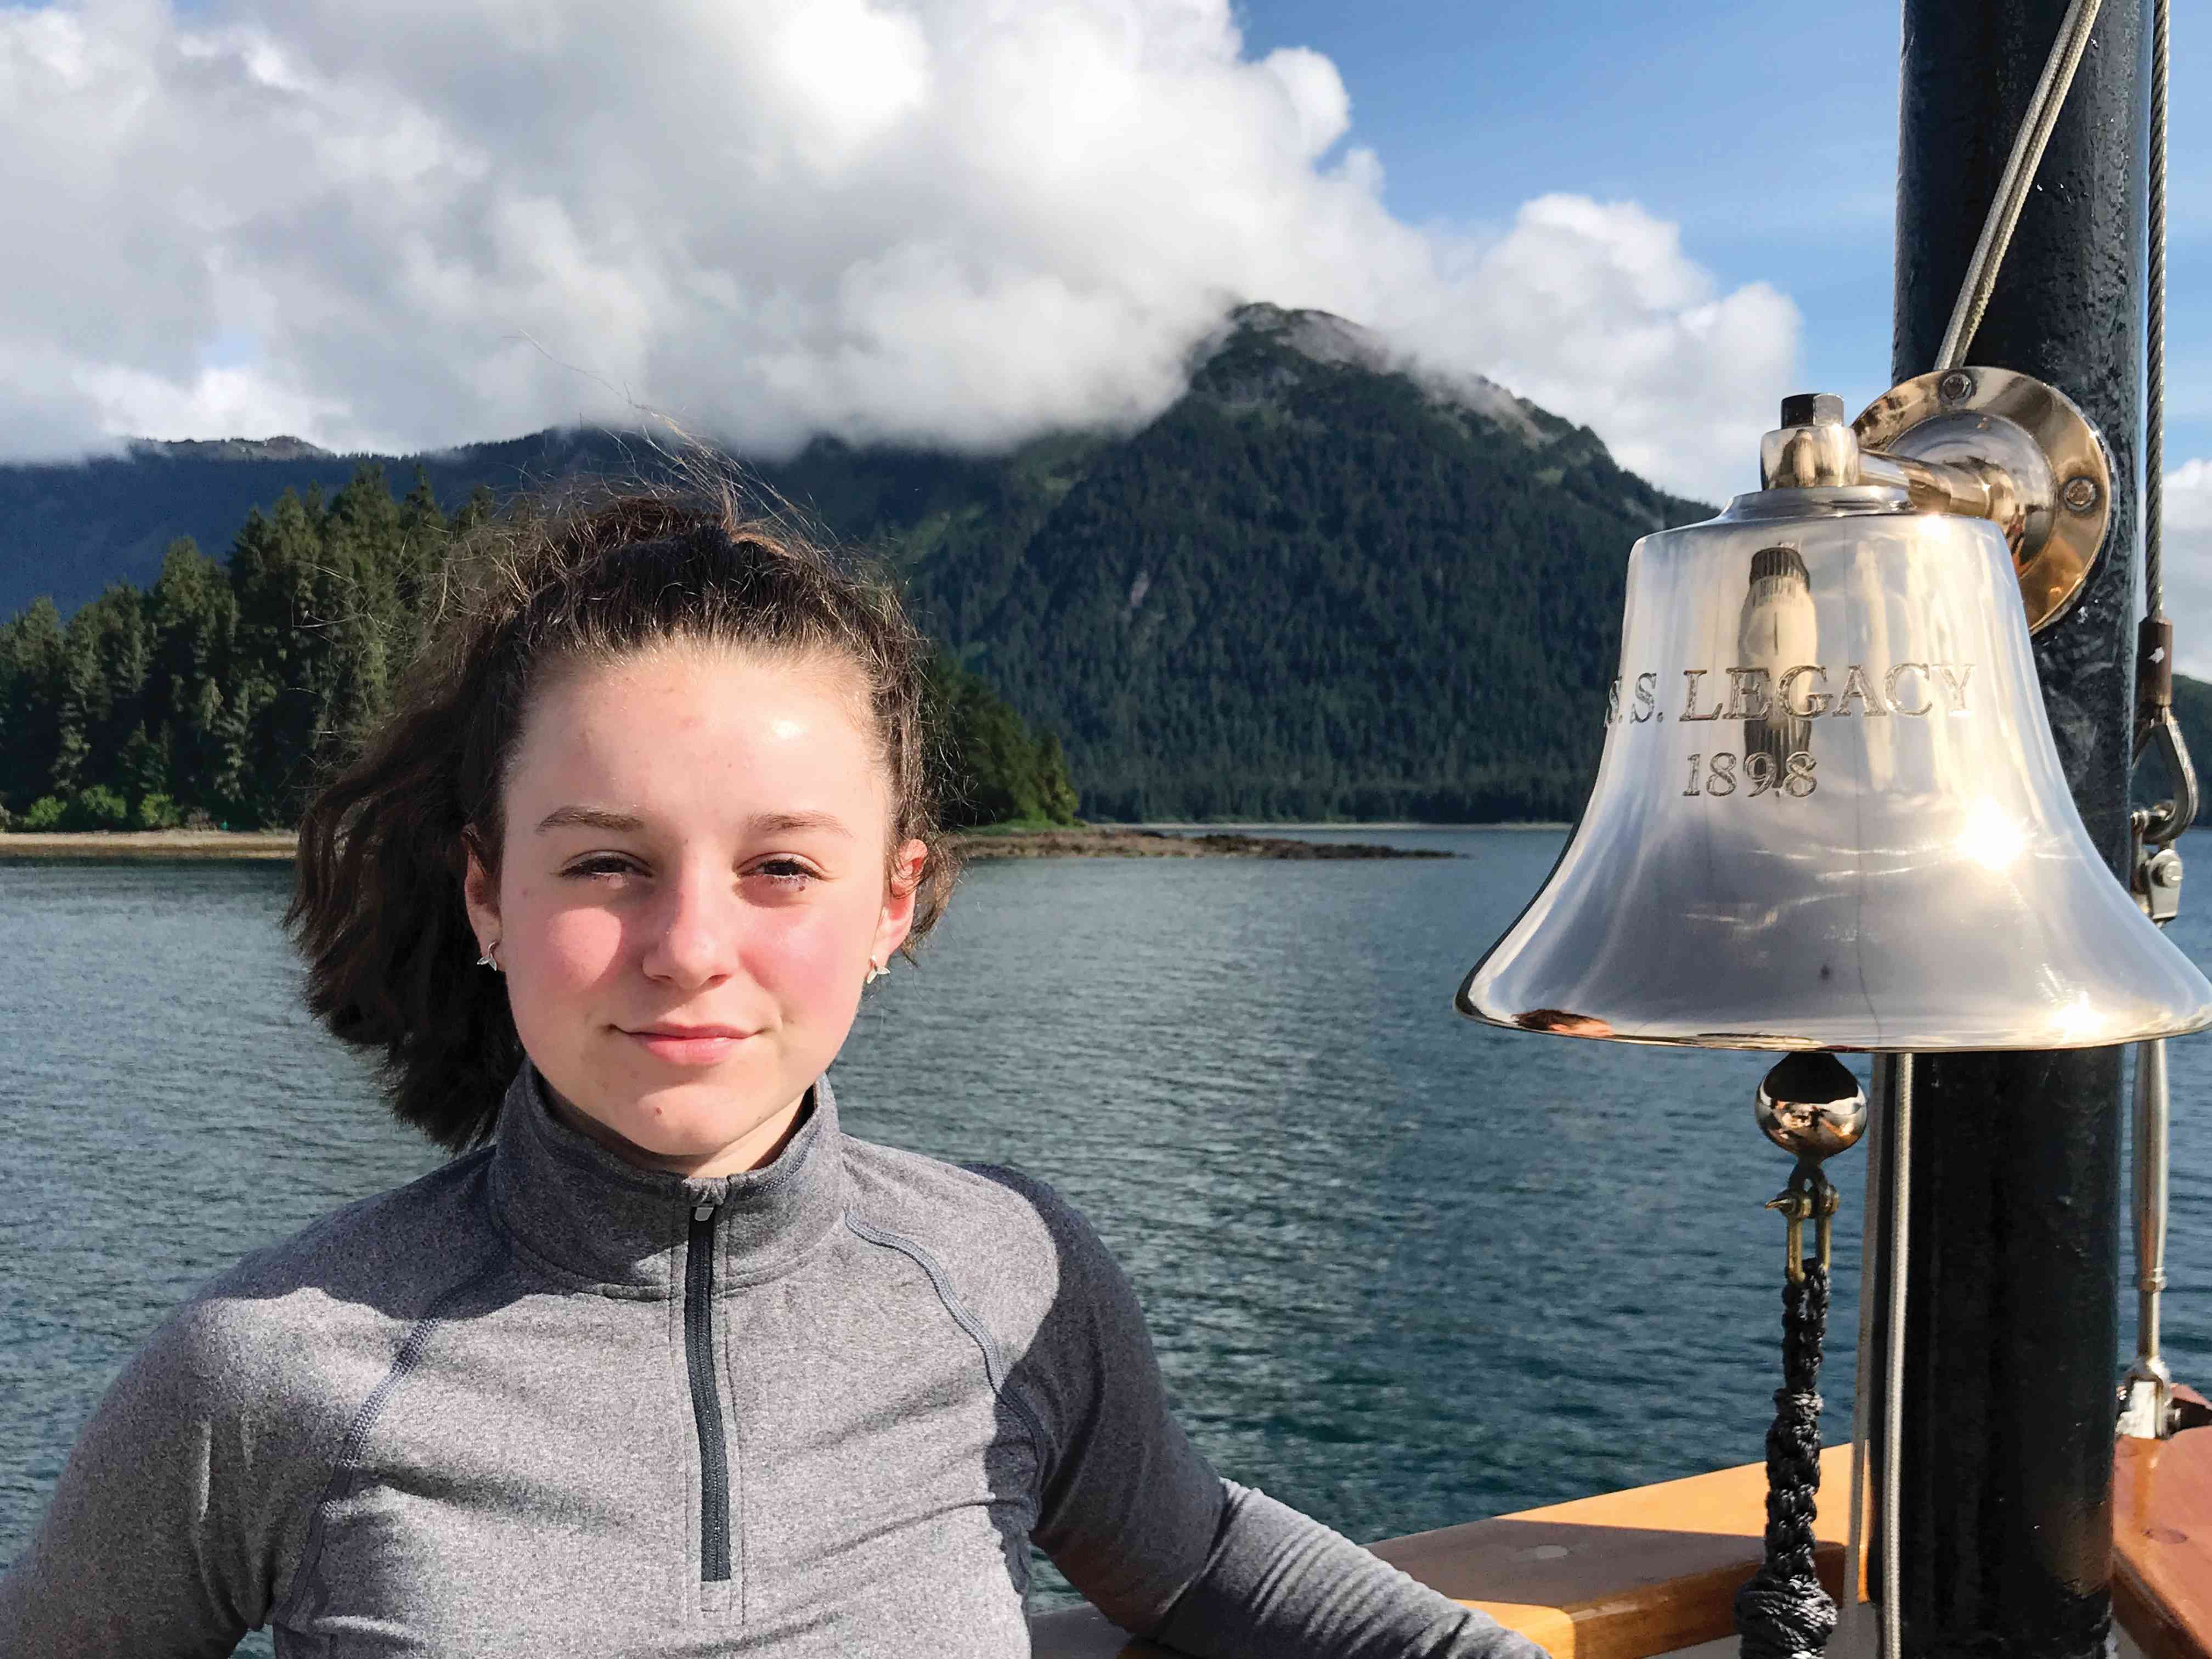 Madeline at the SS Legacy steamer's bell Photo Kate Armstrong